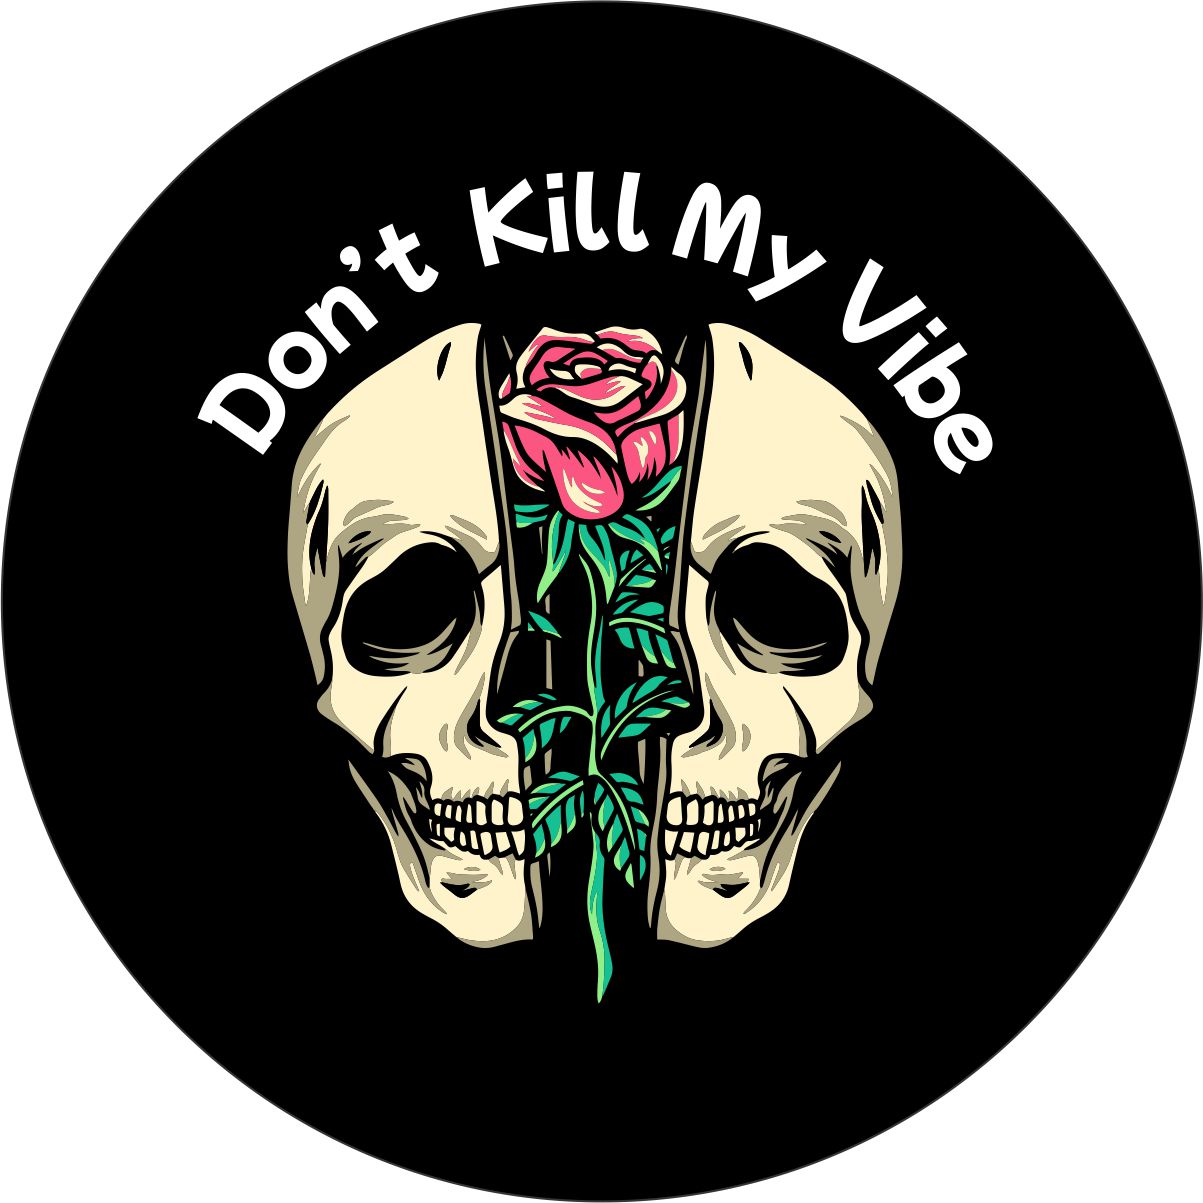 Black vinyl spare tire cover design for any vehicle including Jeep, Bronco, camper, RV, trailer, and more. Skull design split in half with a rose and the saying, "don't kill my vibe."